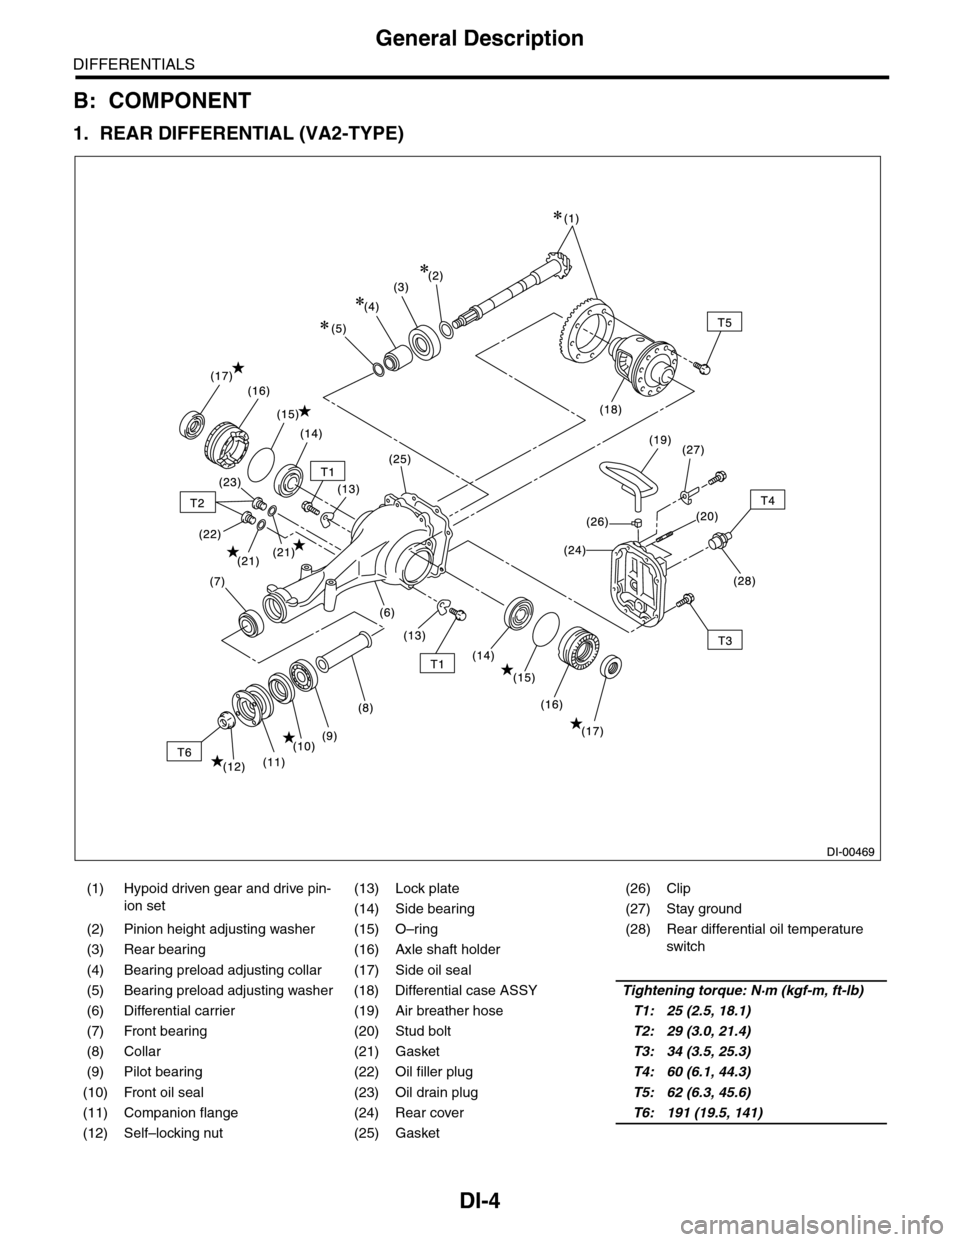 SUBARU TRIBECA 2009 1.G Service Workshop Manual DI-4
General Description
DIFFERENTIALS
B: COMPONENT
1. REAR DIFFERENTIAL (VA2-TYPE)
(1) Hypoid driven gear and drive pin-
ion set
(13) Lock plate (26) Clip
(14) Side bearing (27) Stay ground
(2) Pinio